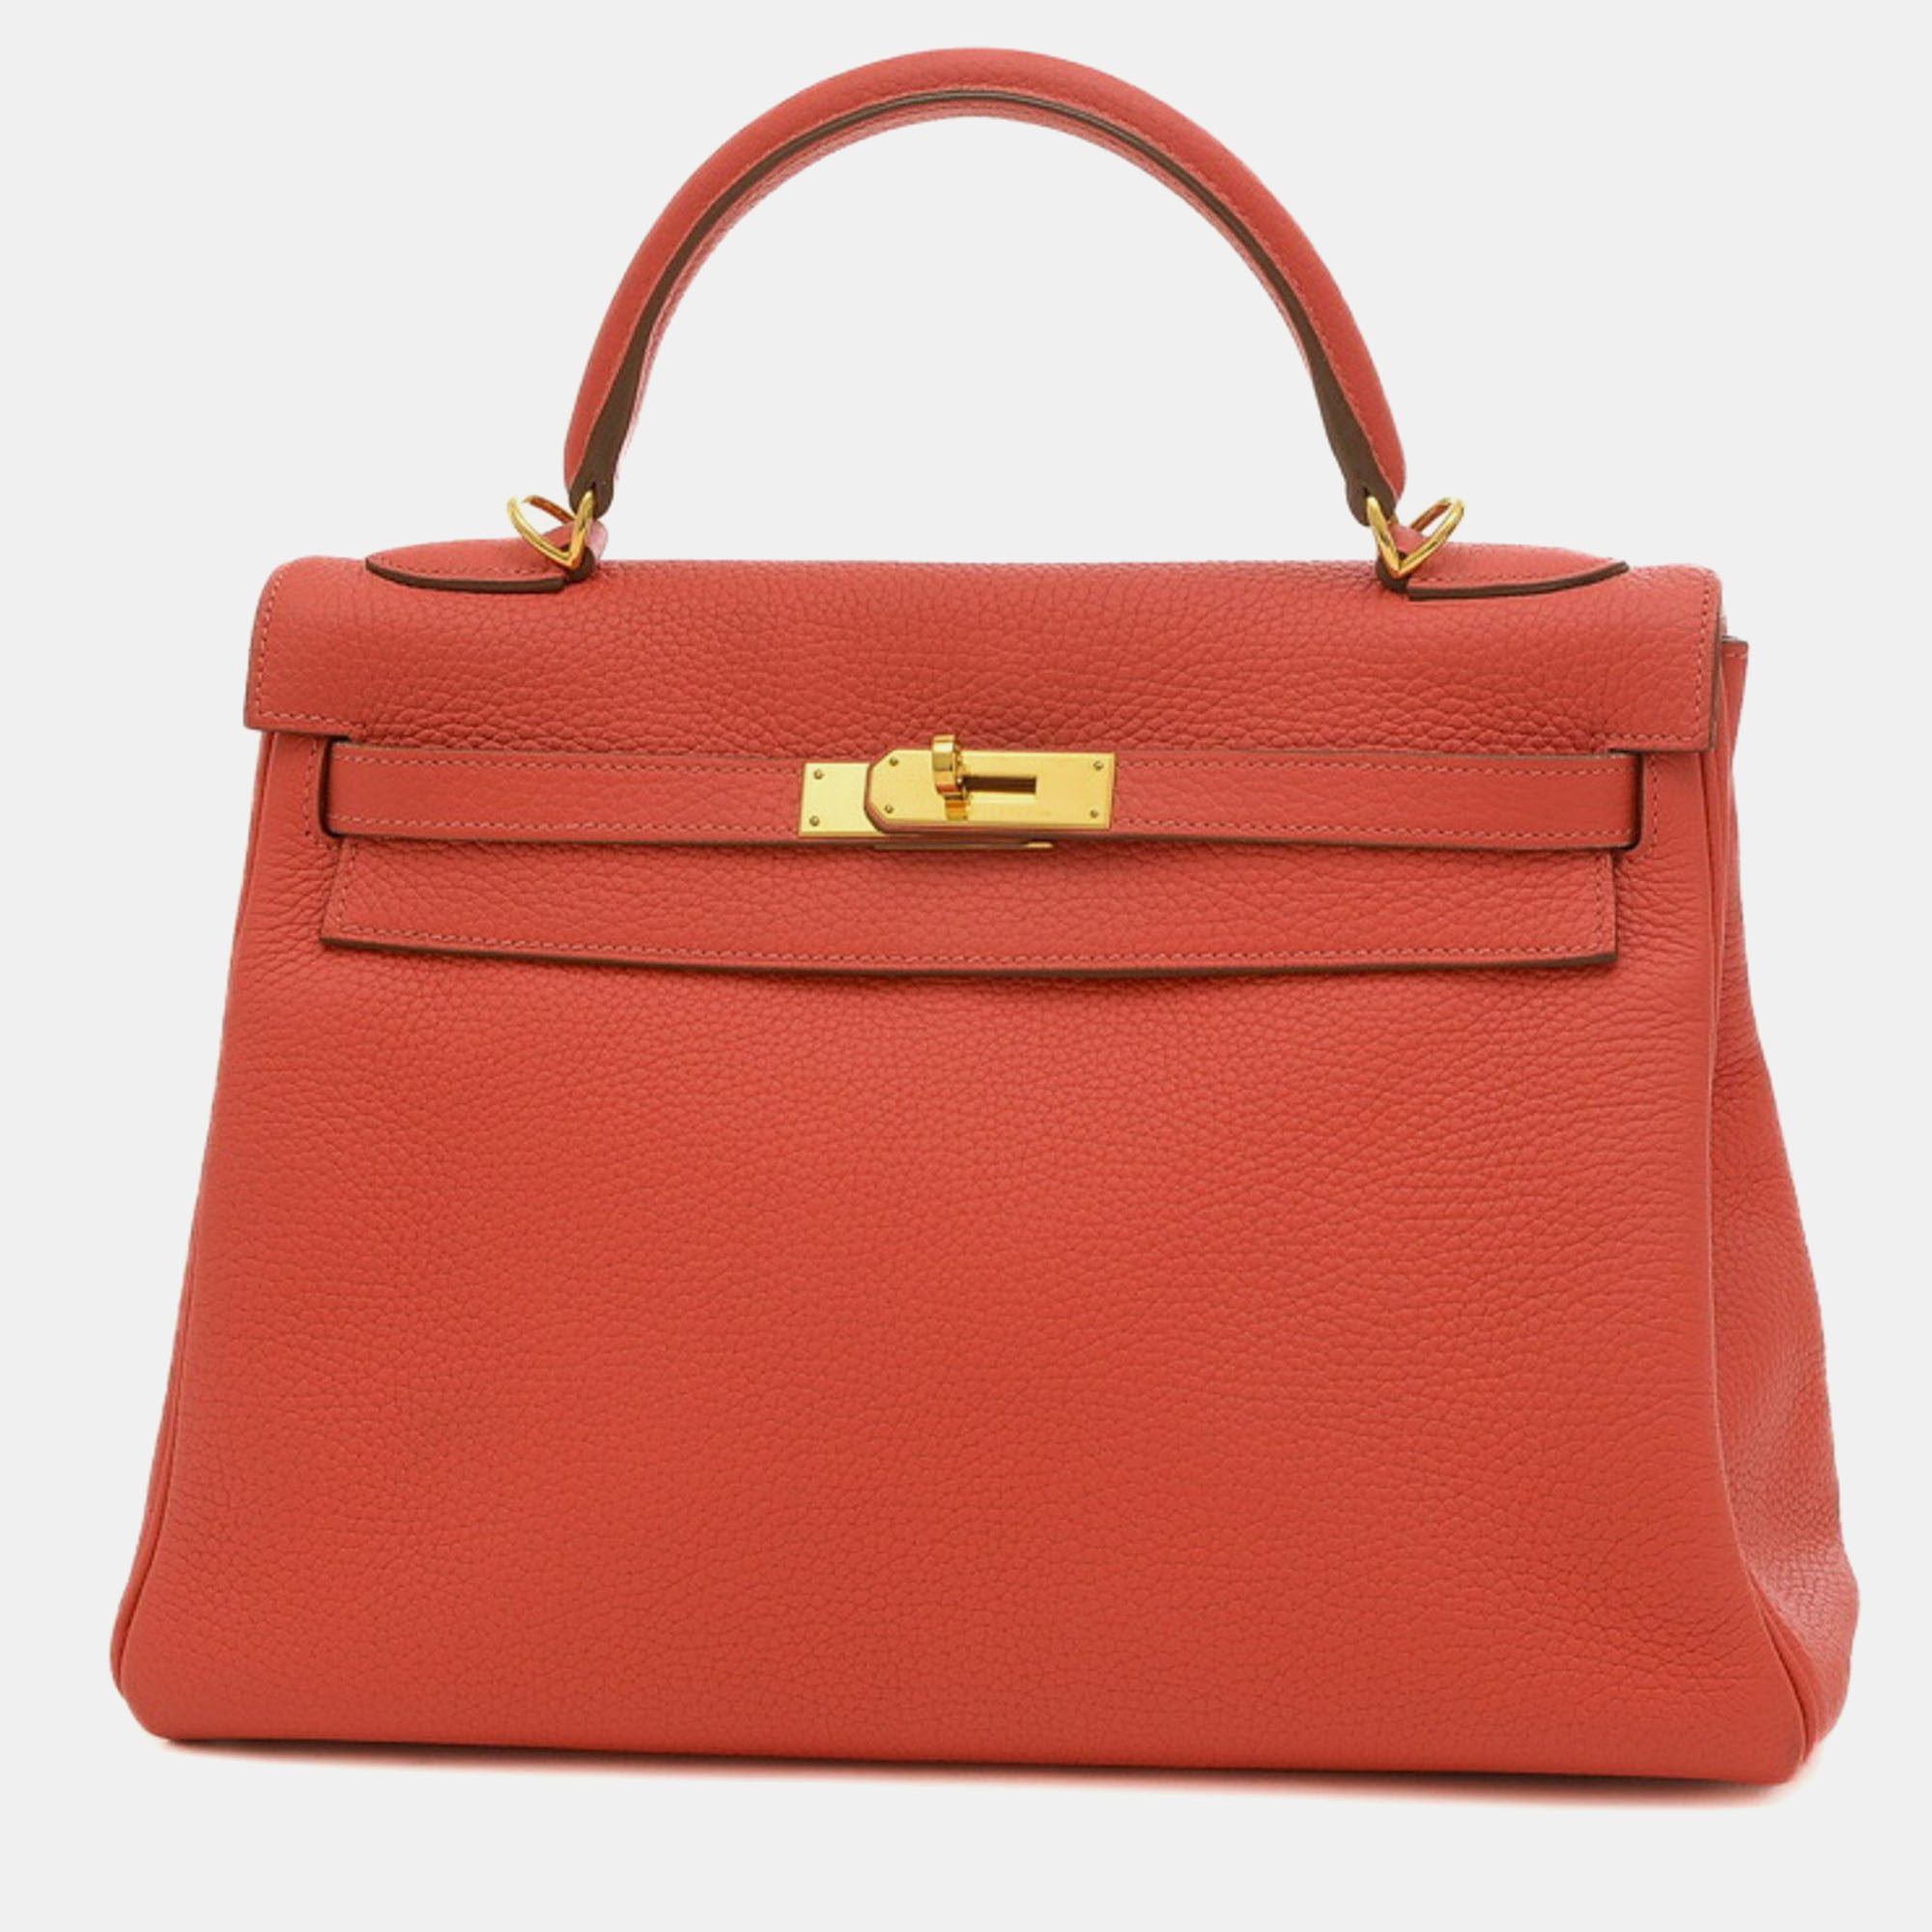 Hermes rose jaipur taurillon clemence leather kelly 32 tote bag